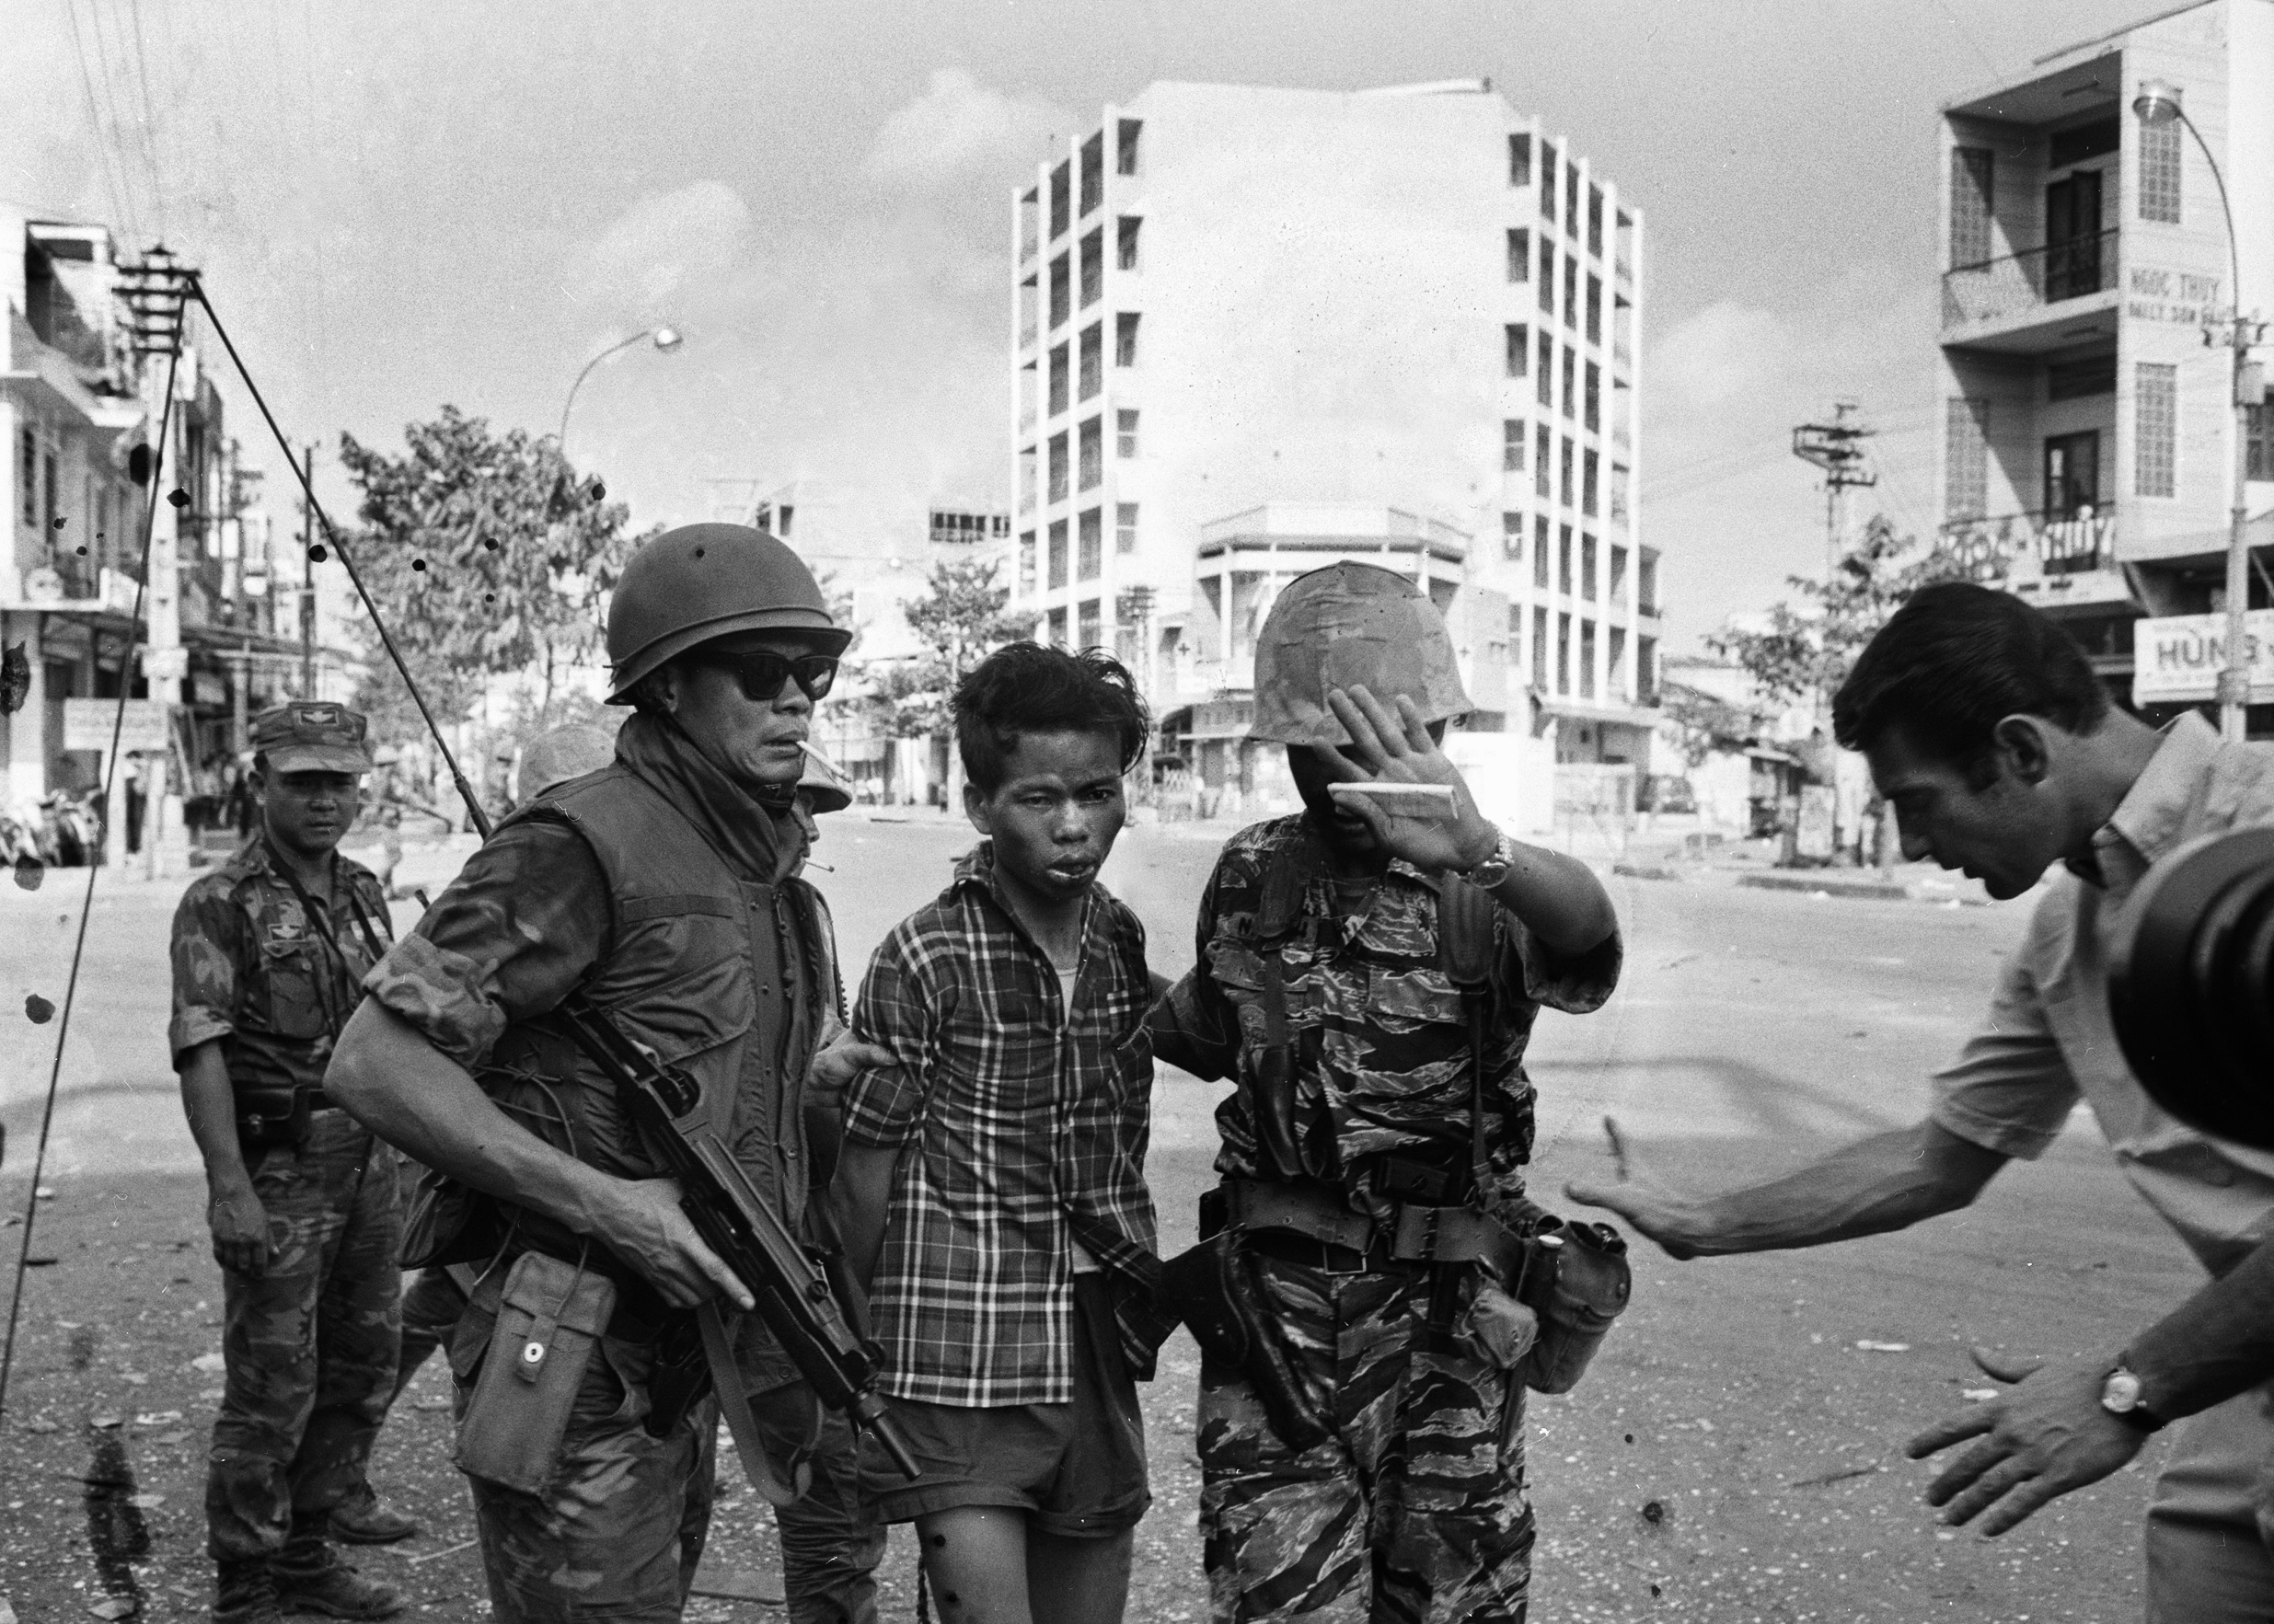 Nguyen Van Lem; Bay Lop South Vietnamese forces escort suspected Viet Cong officer Nguyen Van Lem (also known as Bay Lop) on a Saigon street Feb. 1, 1968, early in the Tet Offensive. Moments later, Lem was executed by Gen. Nguyen Ngoc Loan, chief of the national police. (AP Photo/Eddie Adams)